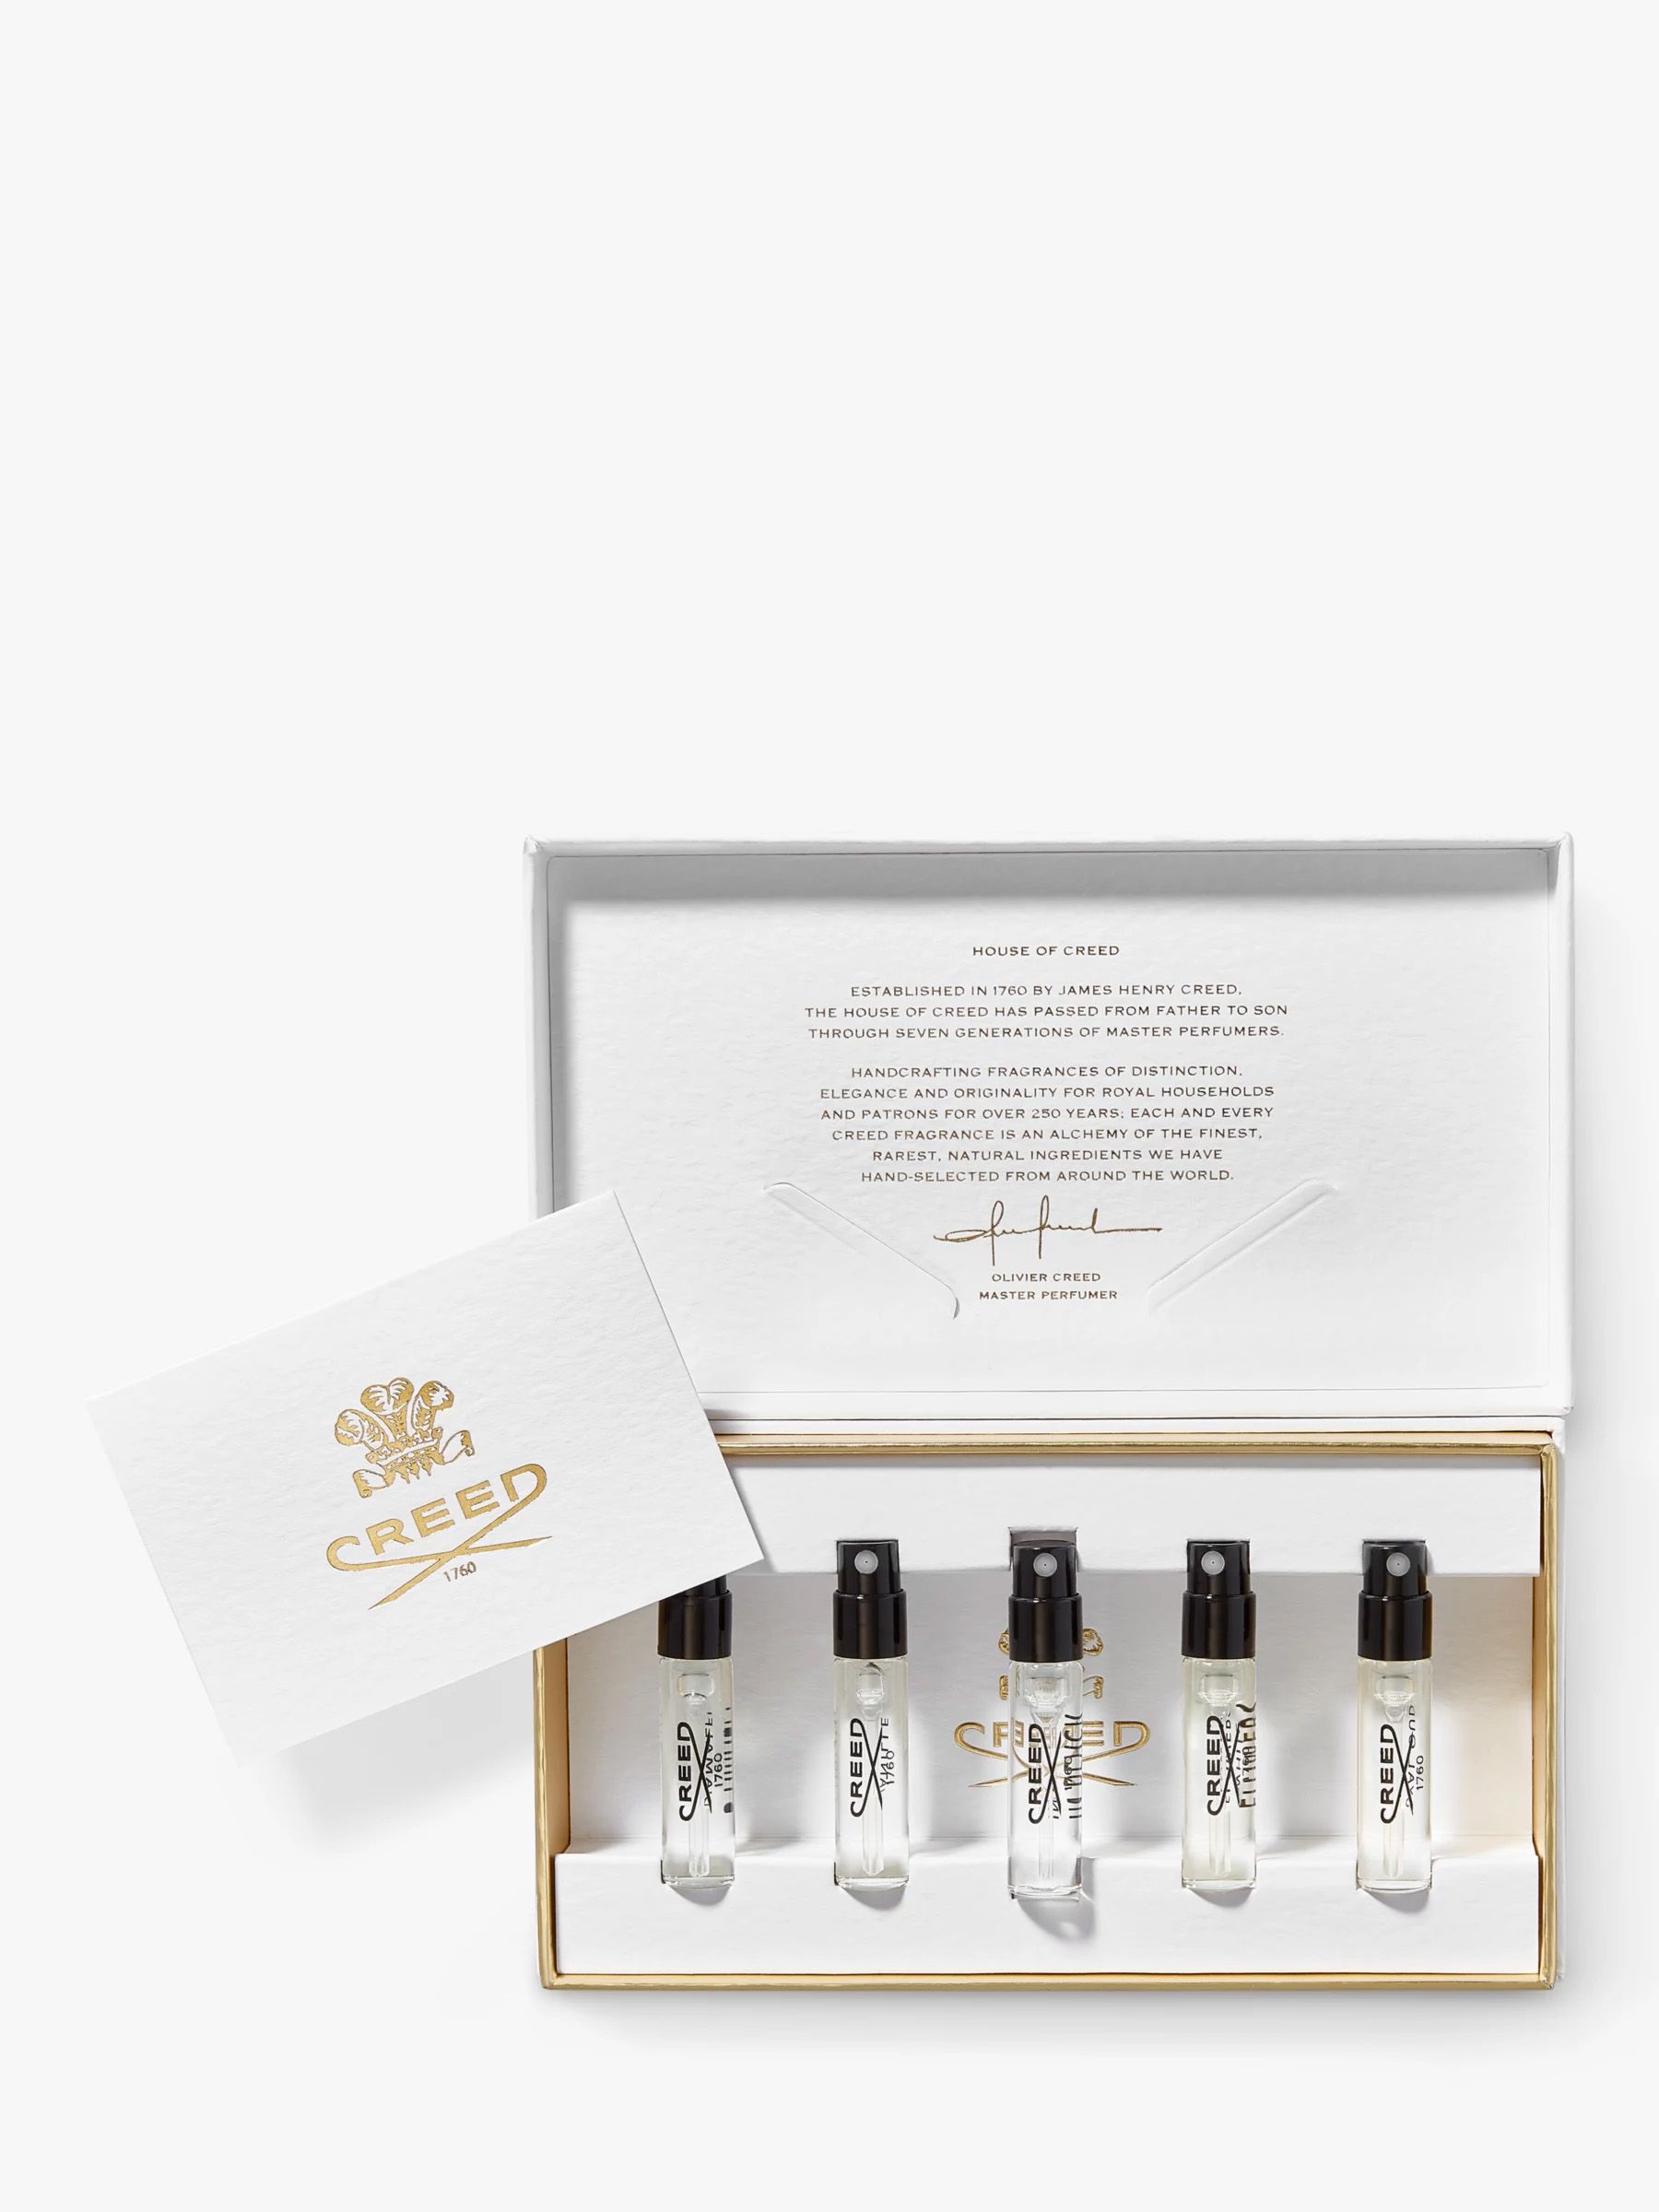 Mini bottles of Creed scents in a gift box, lid open to the side.